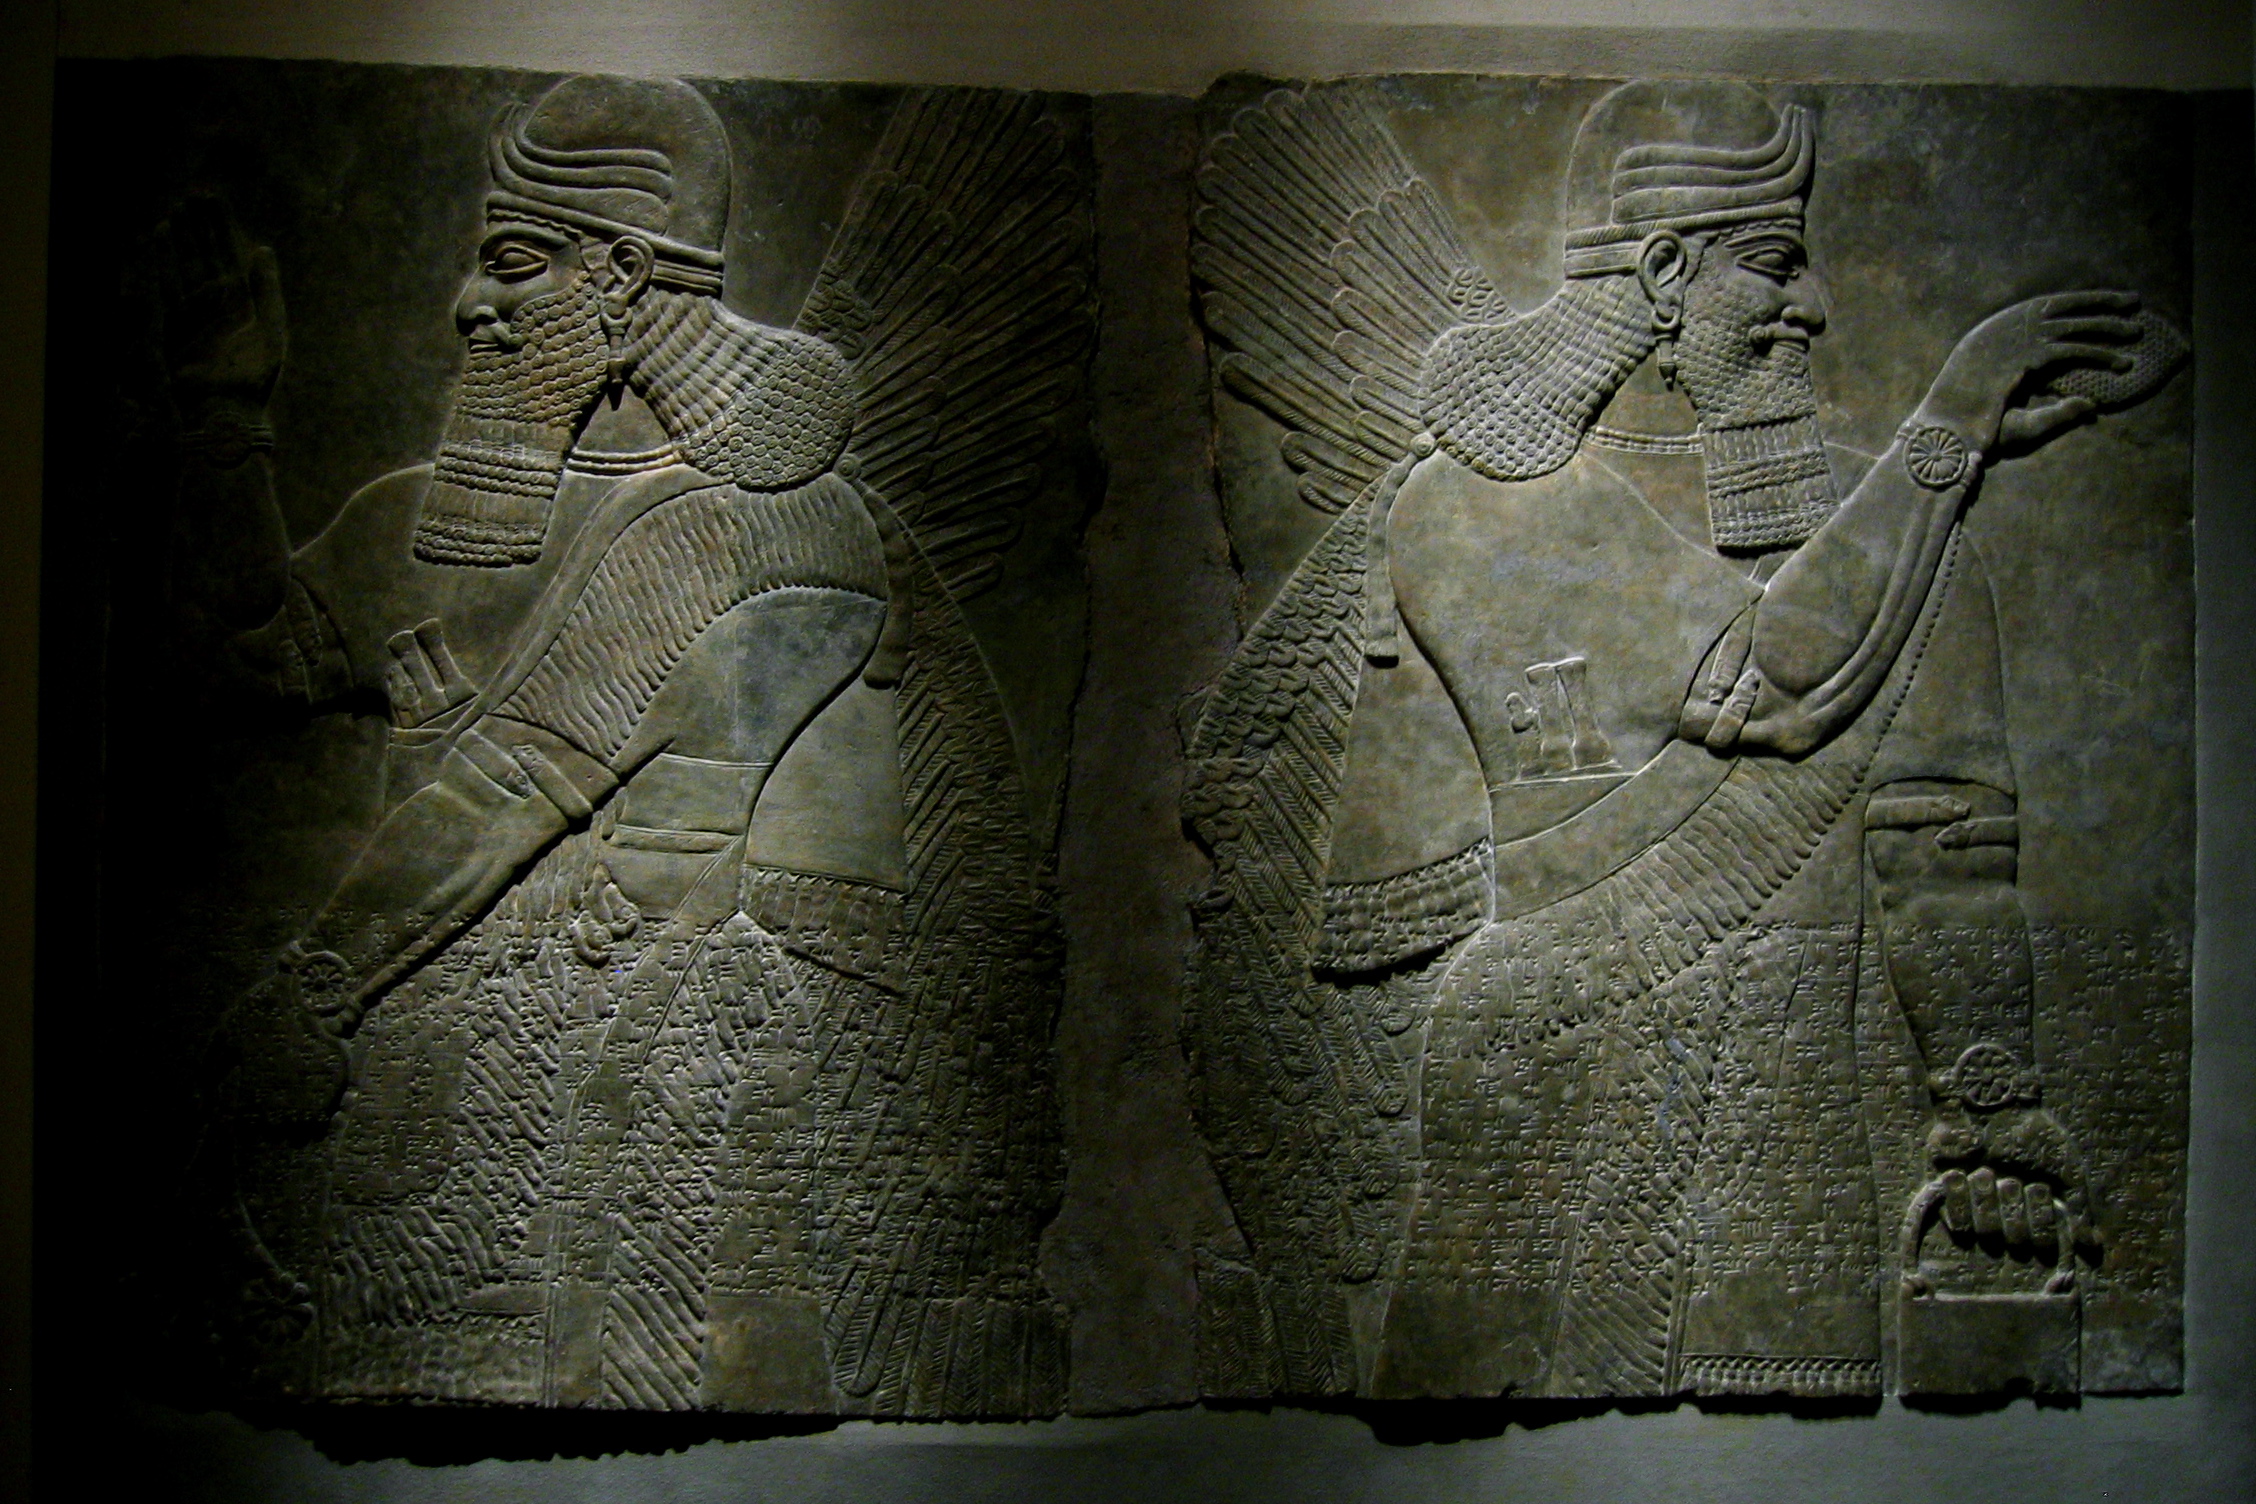 two ancient egyptian stele showing the side panels of men sitting